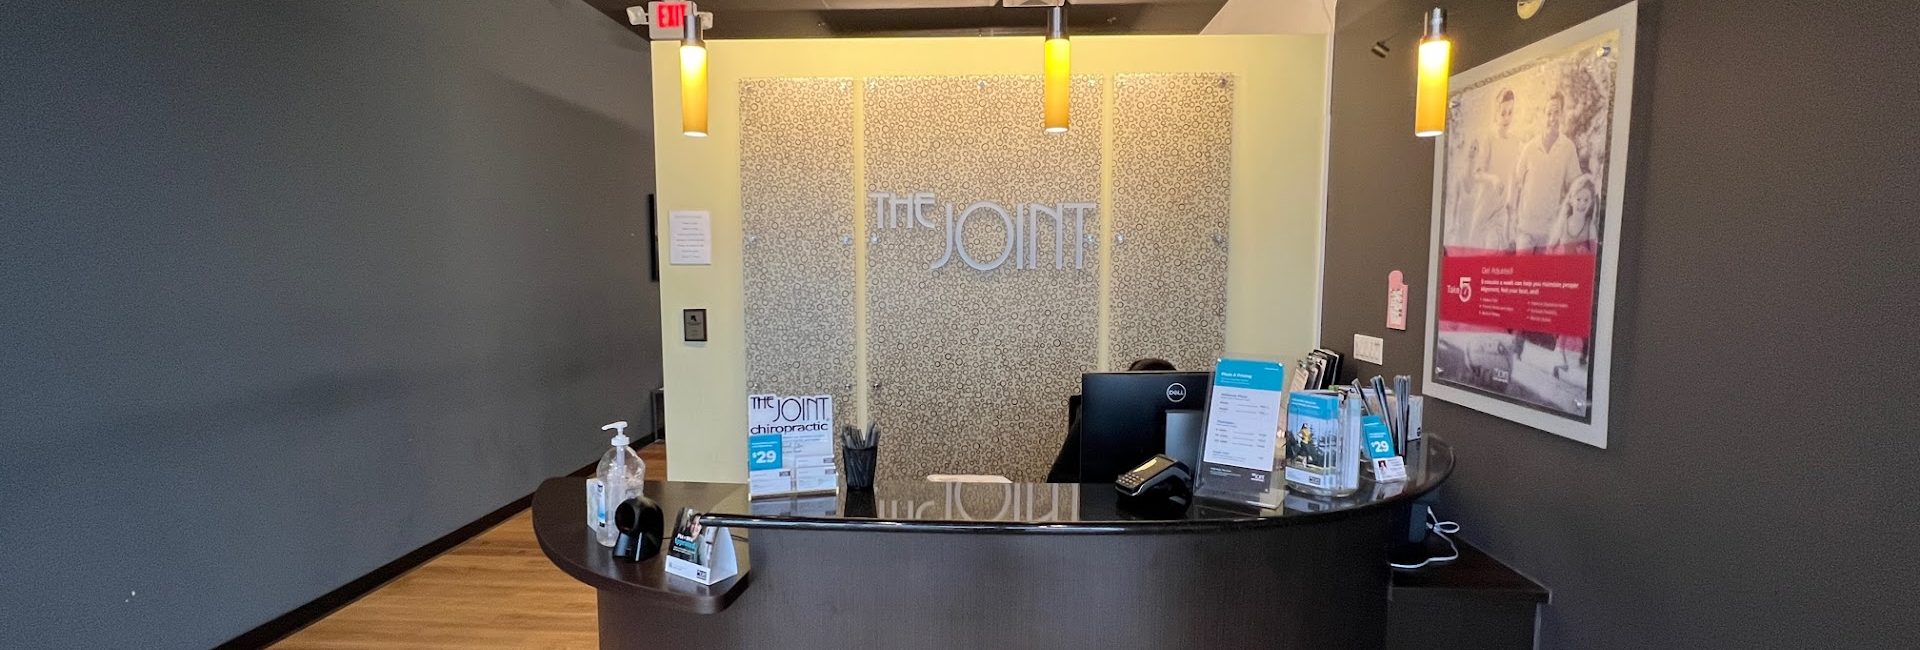 The Joint Chiropractic 3